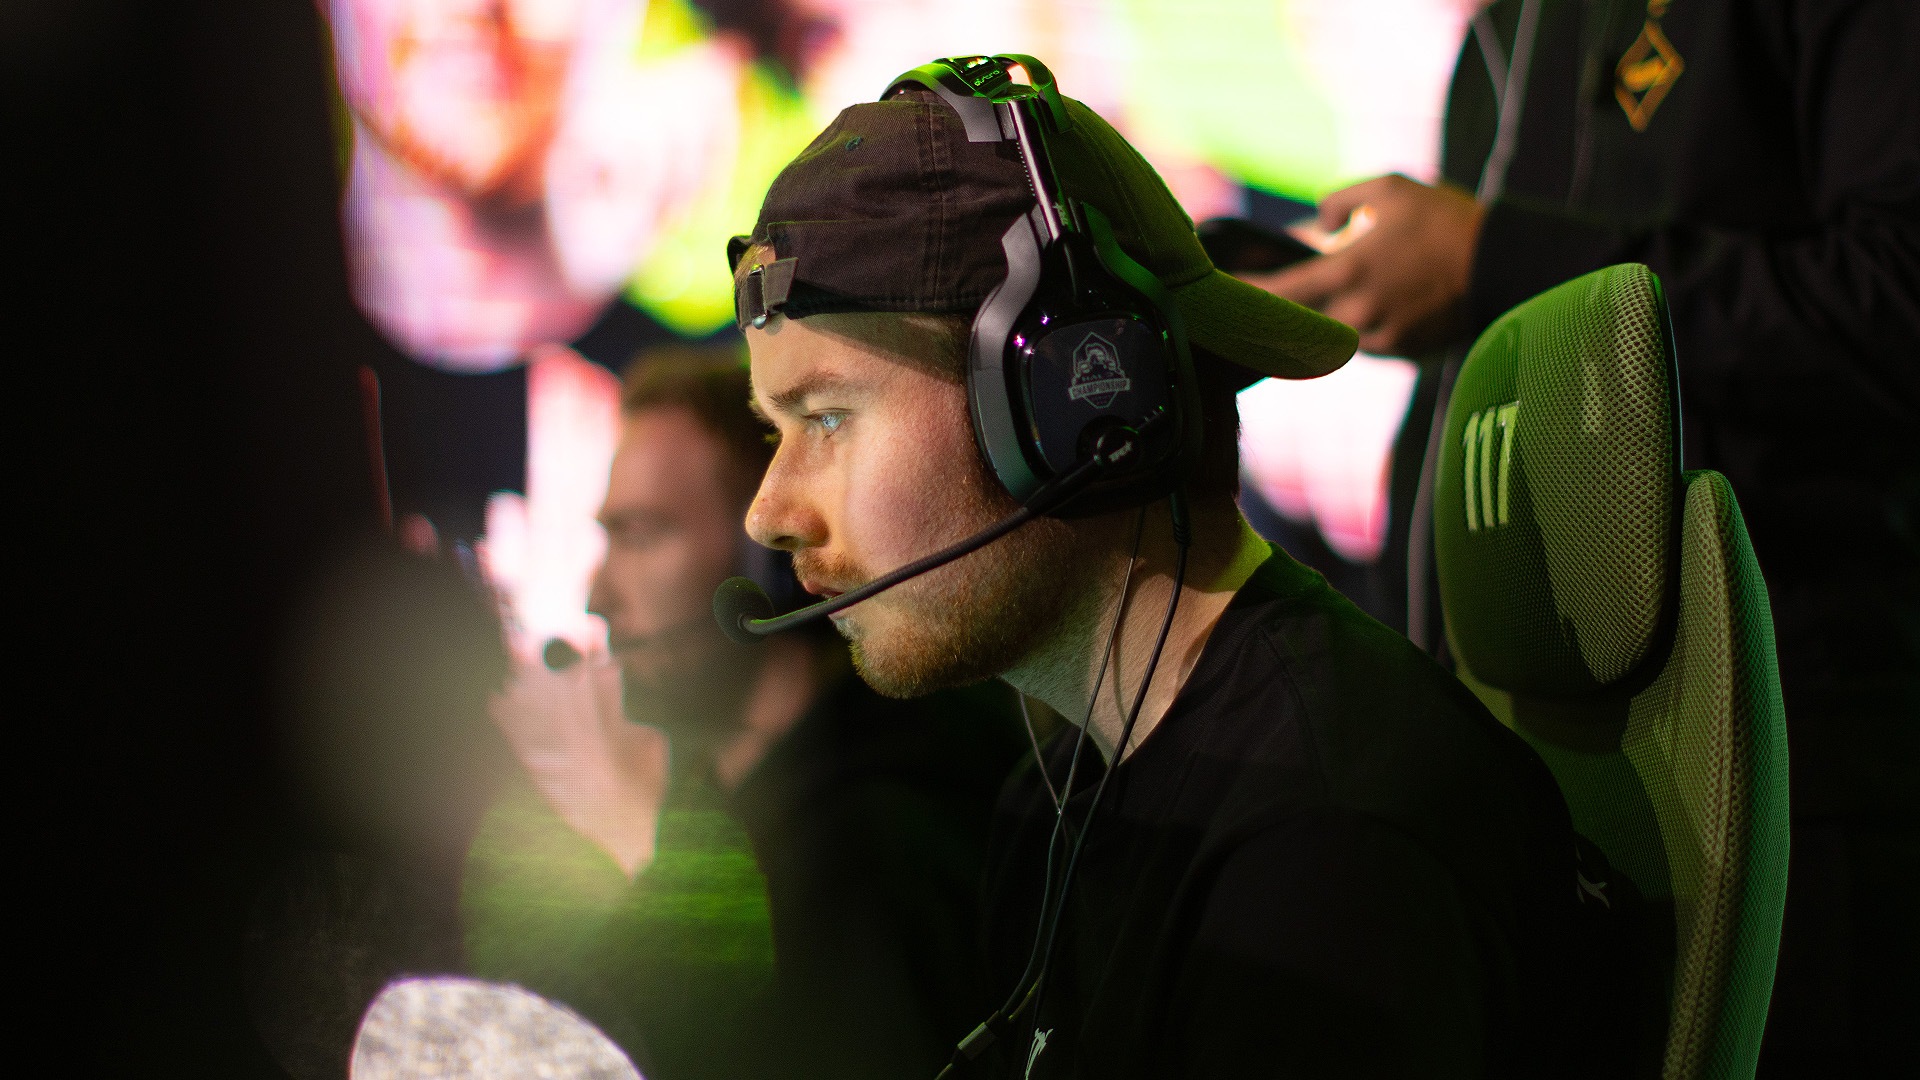 Quadrant's Sica competing on the HCS main stage.